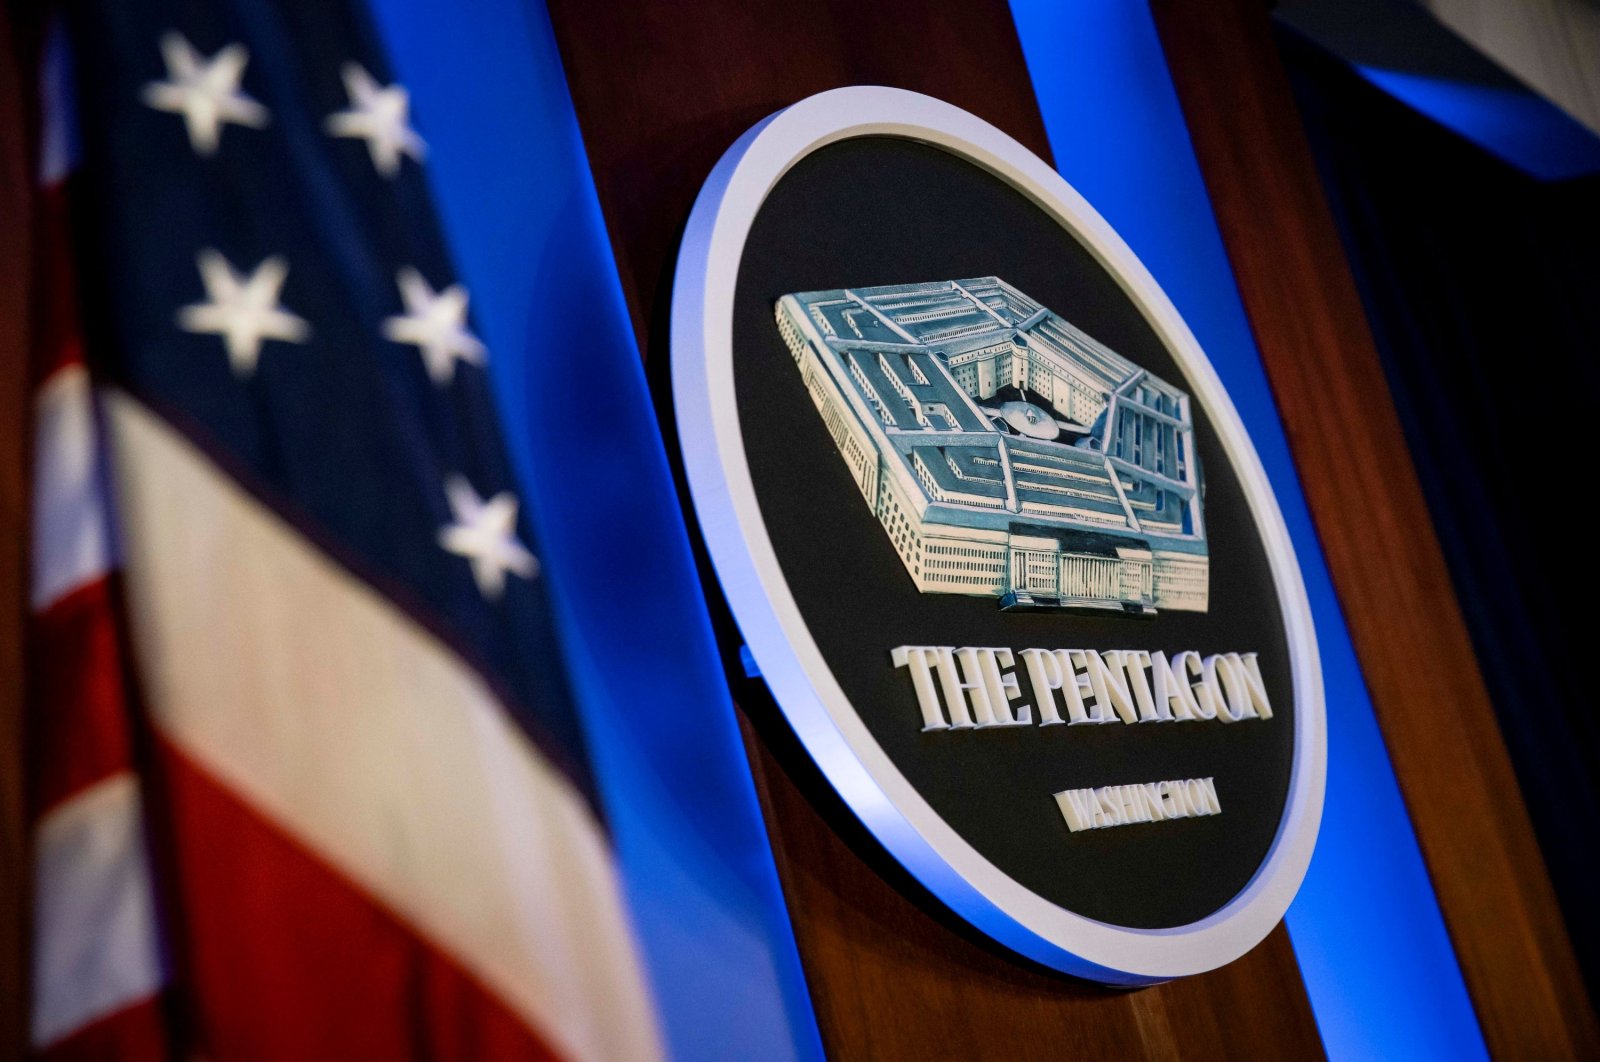 The Pentagon logo is seen behind the podium in the briefing room at the Pentagon in Arlington, Va., U.S., Jan. 8, 2020. (Reuters Photo)